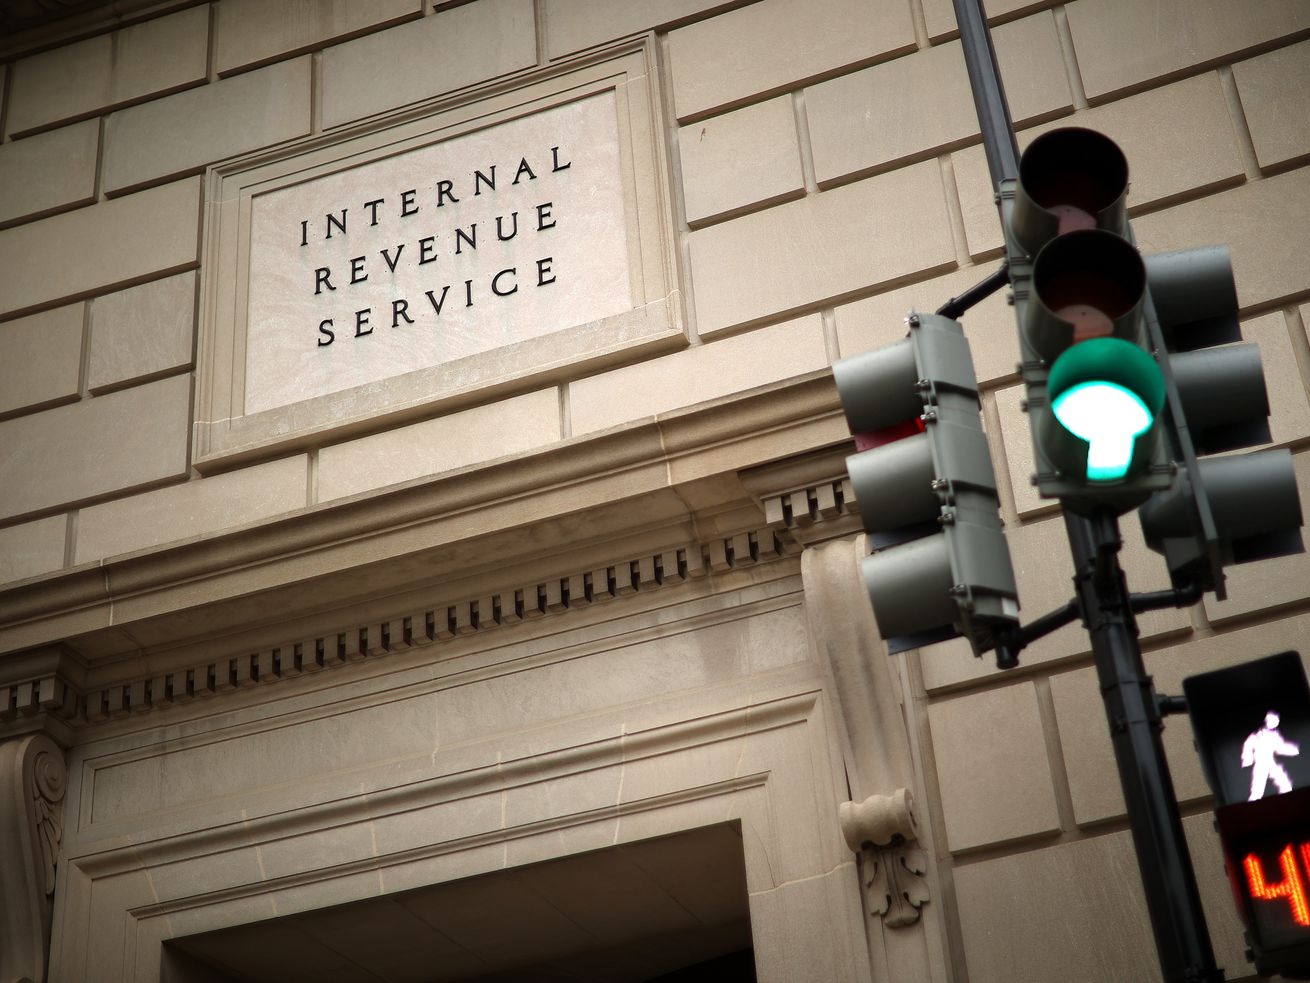 A sign reading “Internal Revenue Service” outside a building.